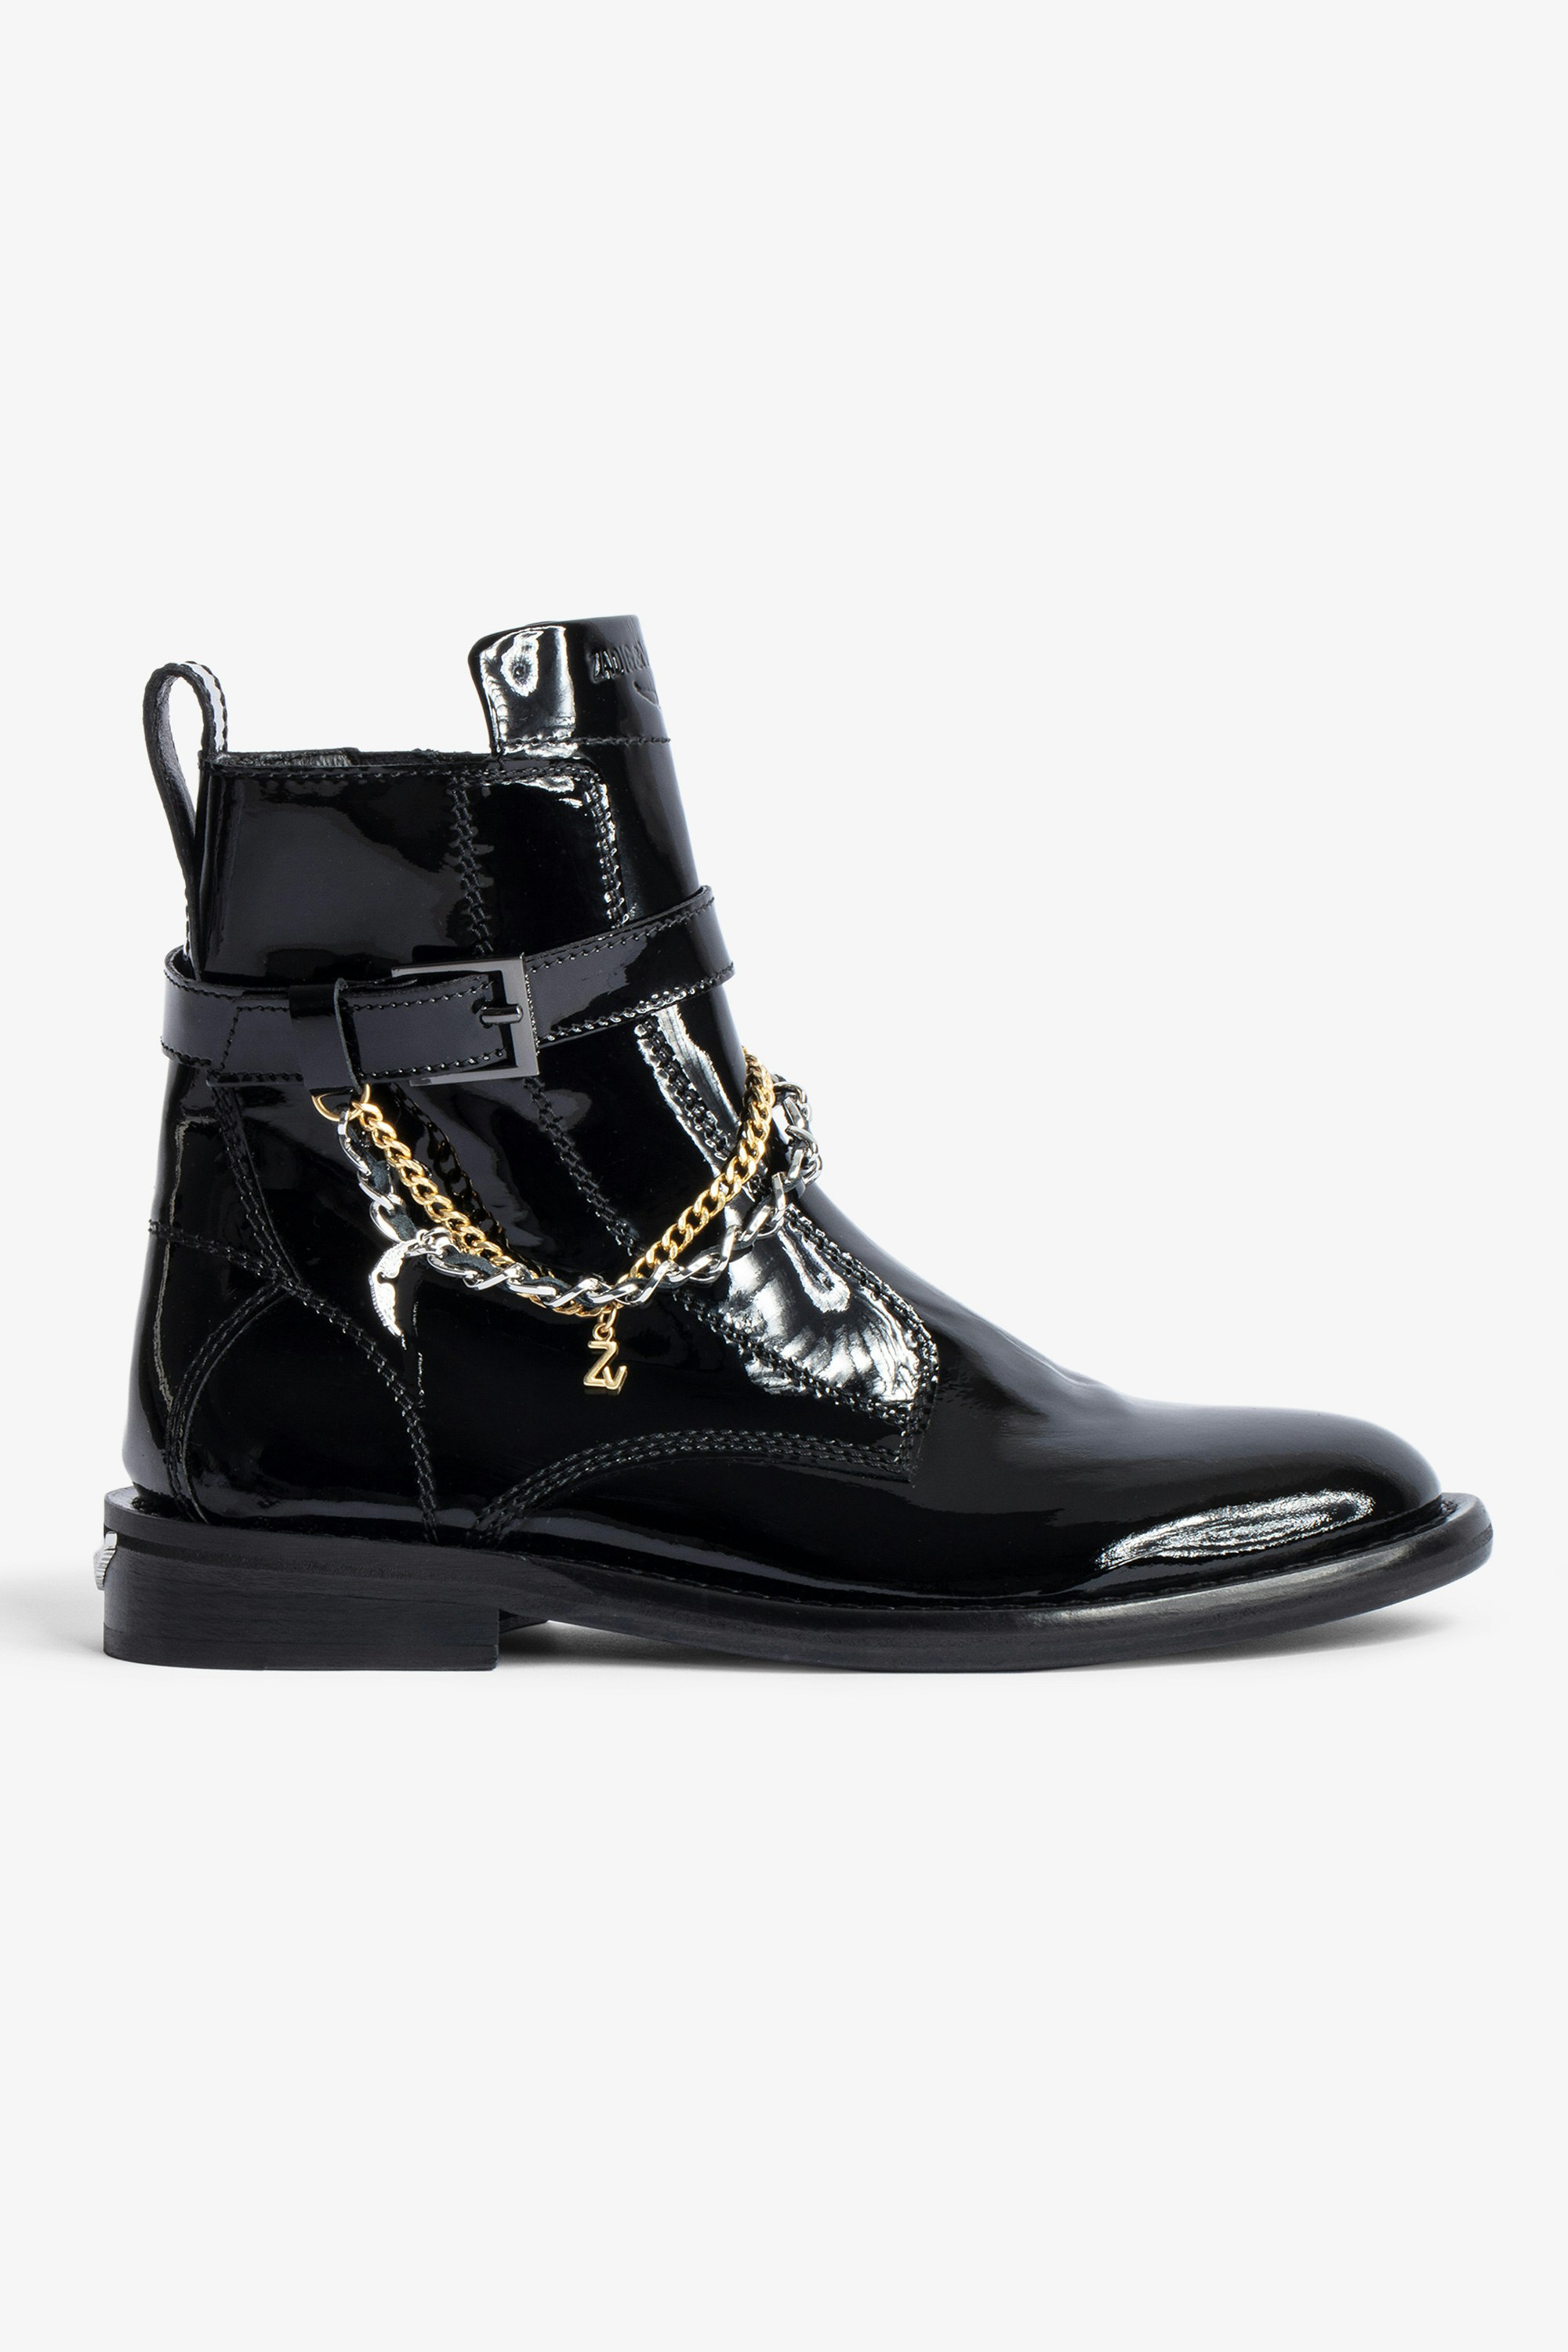 Laureen High Ankle Boots Women’s patent black leather ankle boots with strap, double metal and gold-tone chain and charms